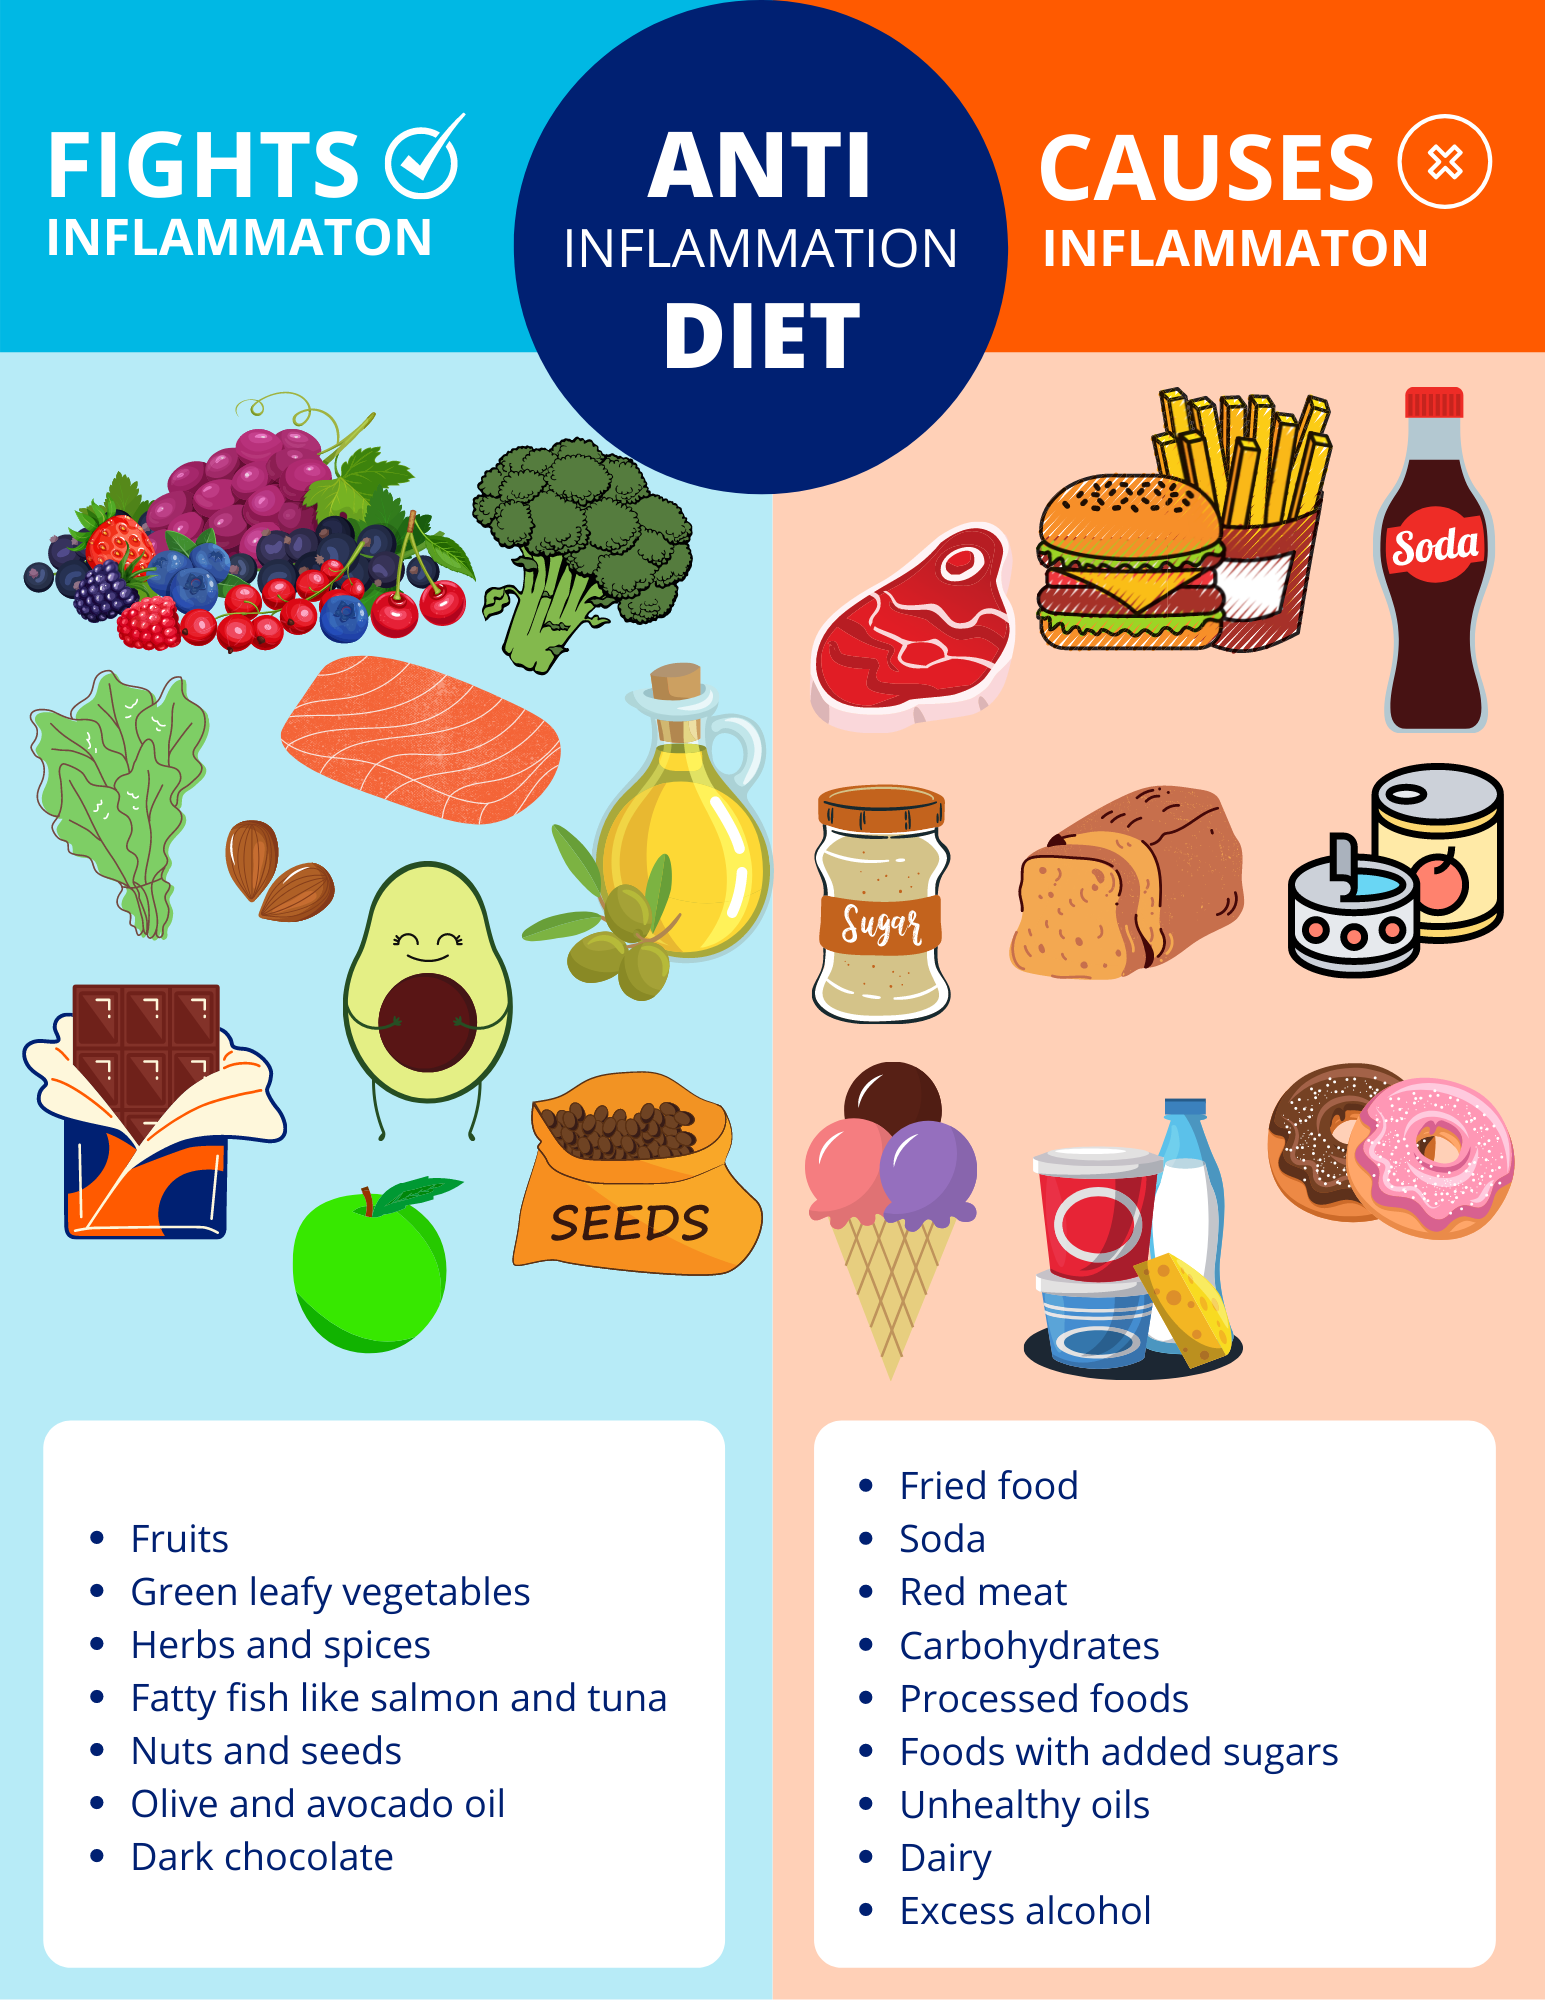 Anti-inflammatory Diet: What to Eat for Reducing Inflammation